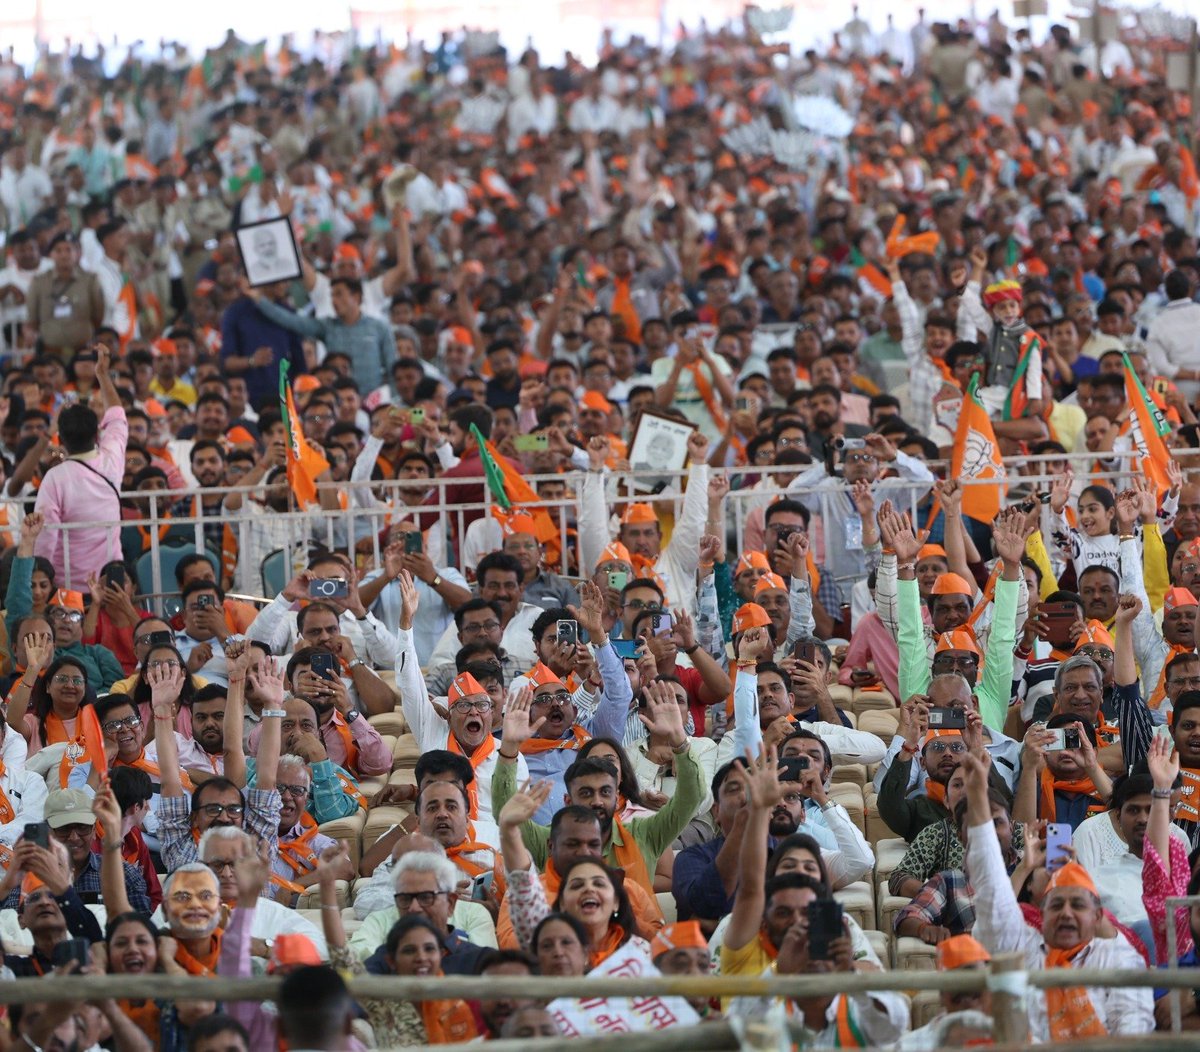 The rallies in Junagadh and Jamnagar were filled with great euphoria. The people of Gujarat, who have anyway rejected Congress for decades, are very angry at the blatant votebank politics they are now advocating.